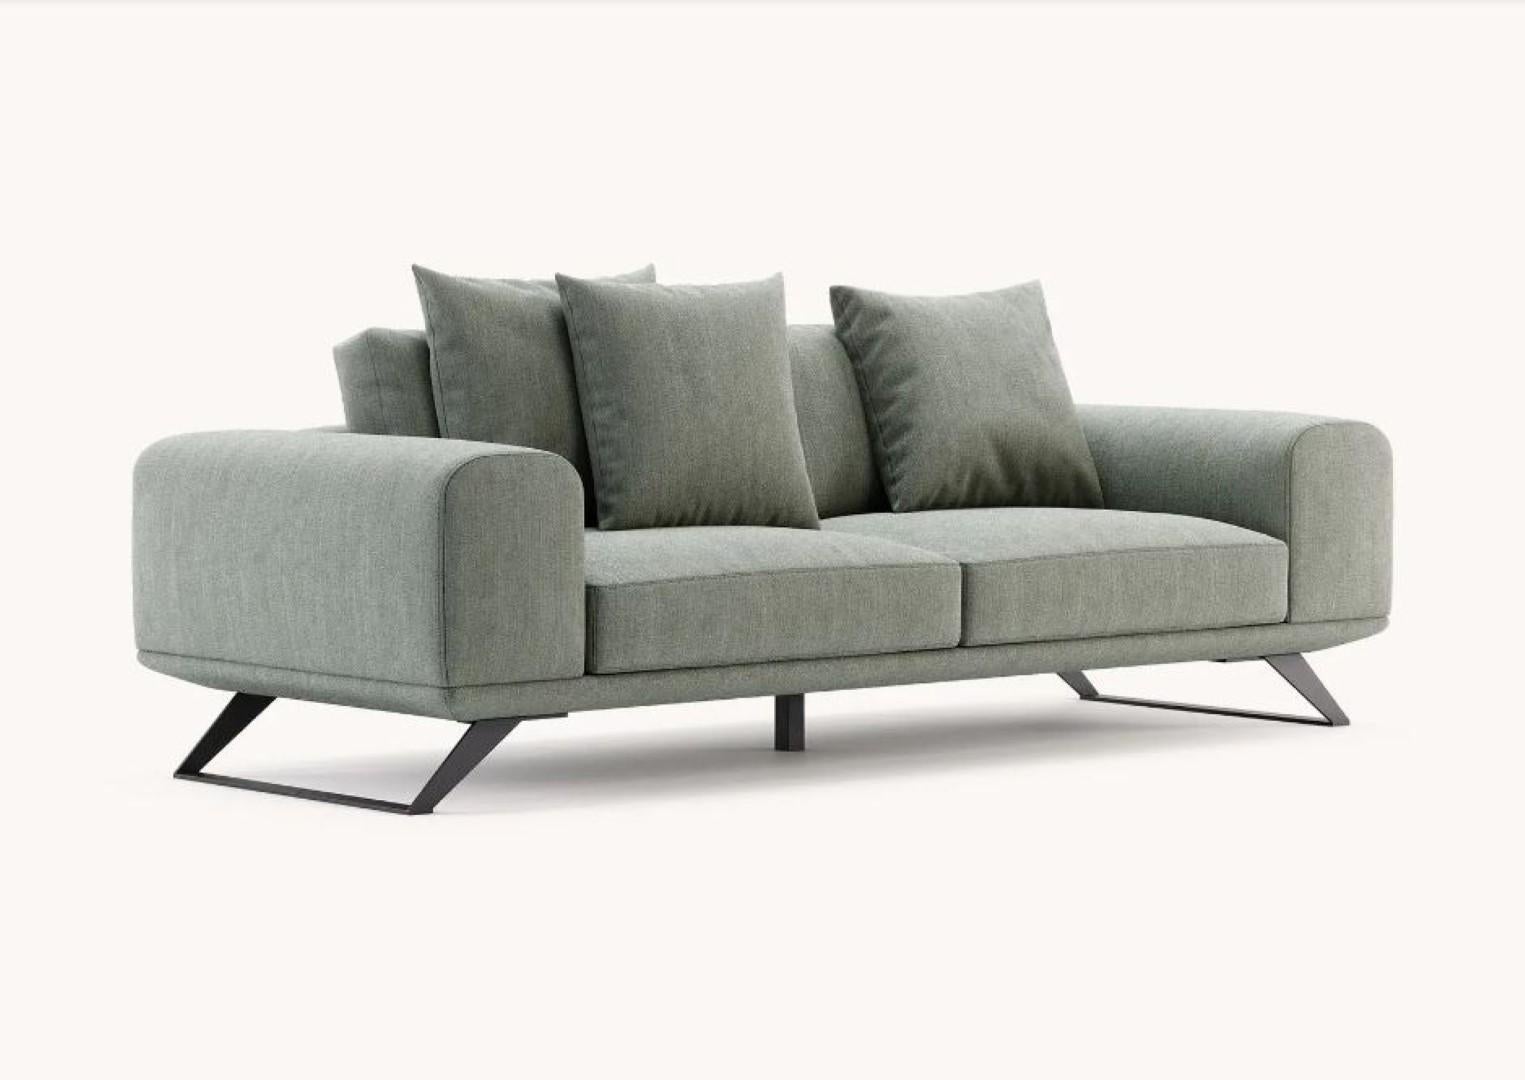 Aniston 3 Seats Sofa by Domkapa
Materials: Fiber, Black Texturized Steel. 
Dimensions: W 230 x D 97 x H 83 cm.
Also available in different materials. Please contact us.

Aniston sofa is a modern design piece where rectangular lines merge